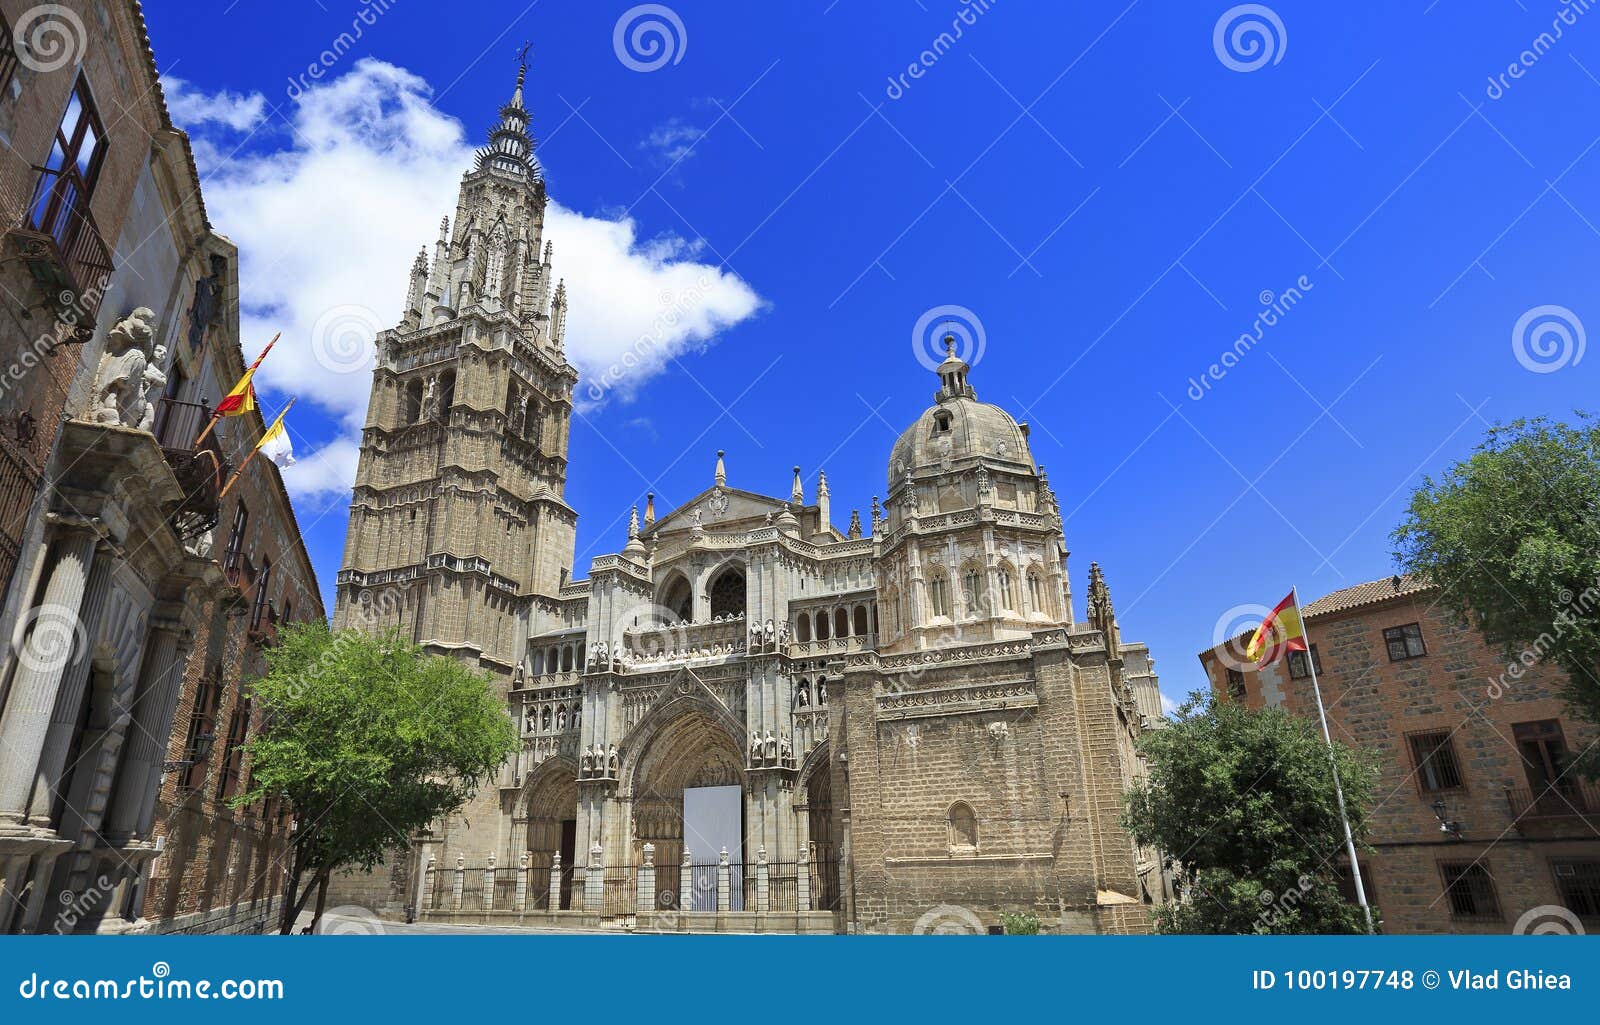 the primate cathedral of saint mary of toledo, spain